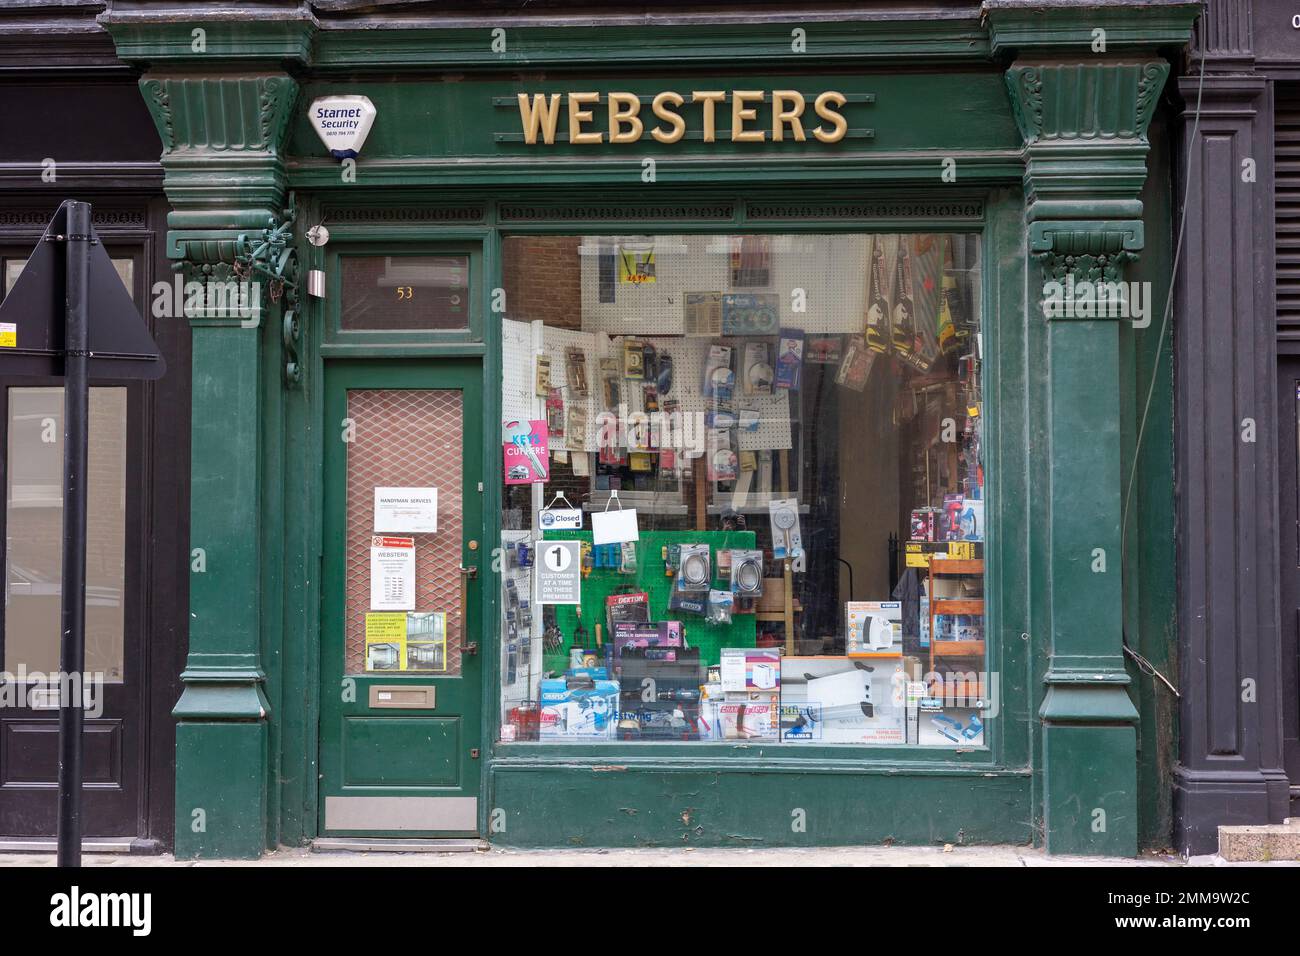 Websters Hardware Store London Stock Photo